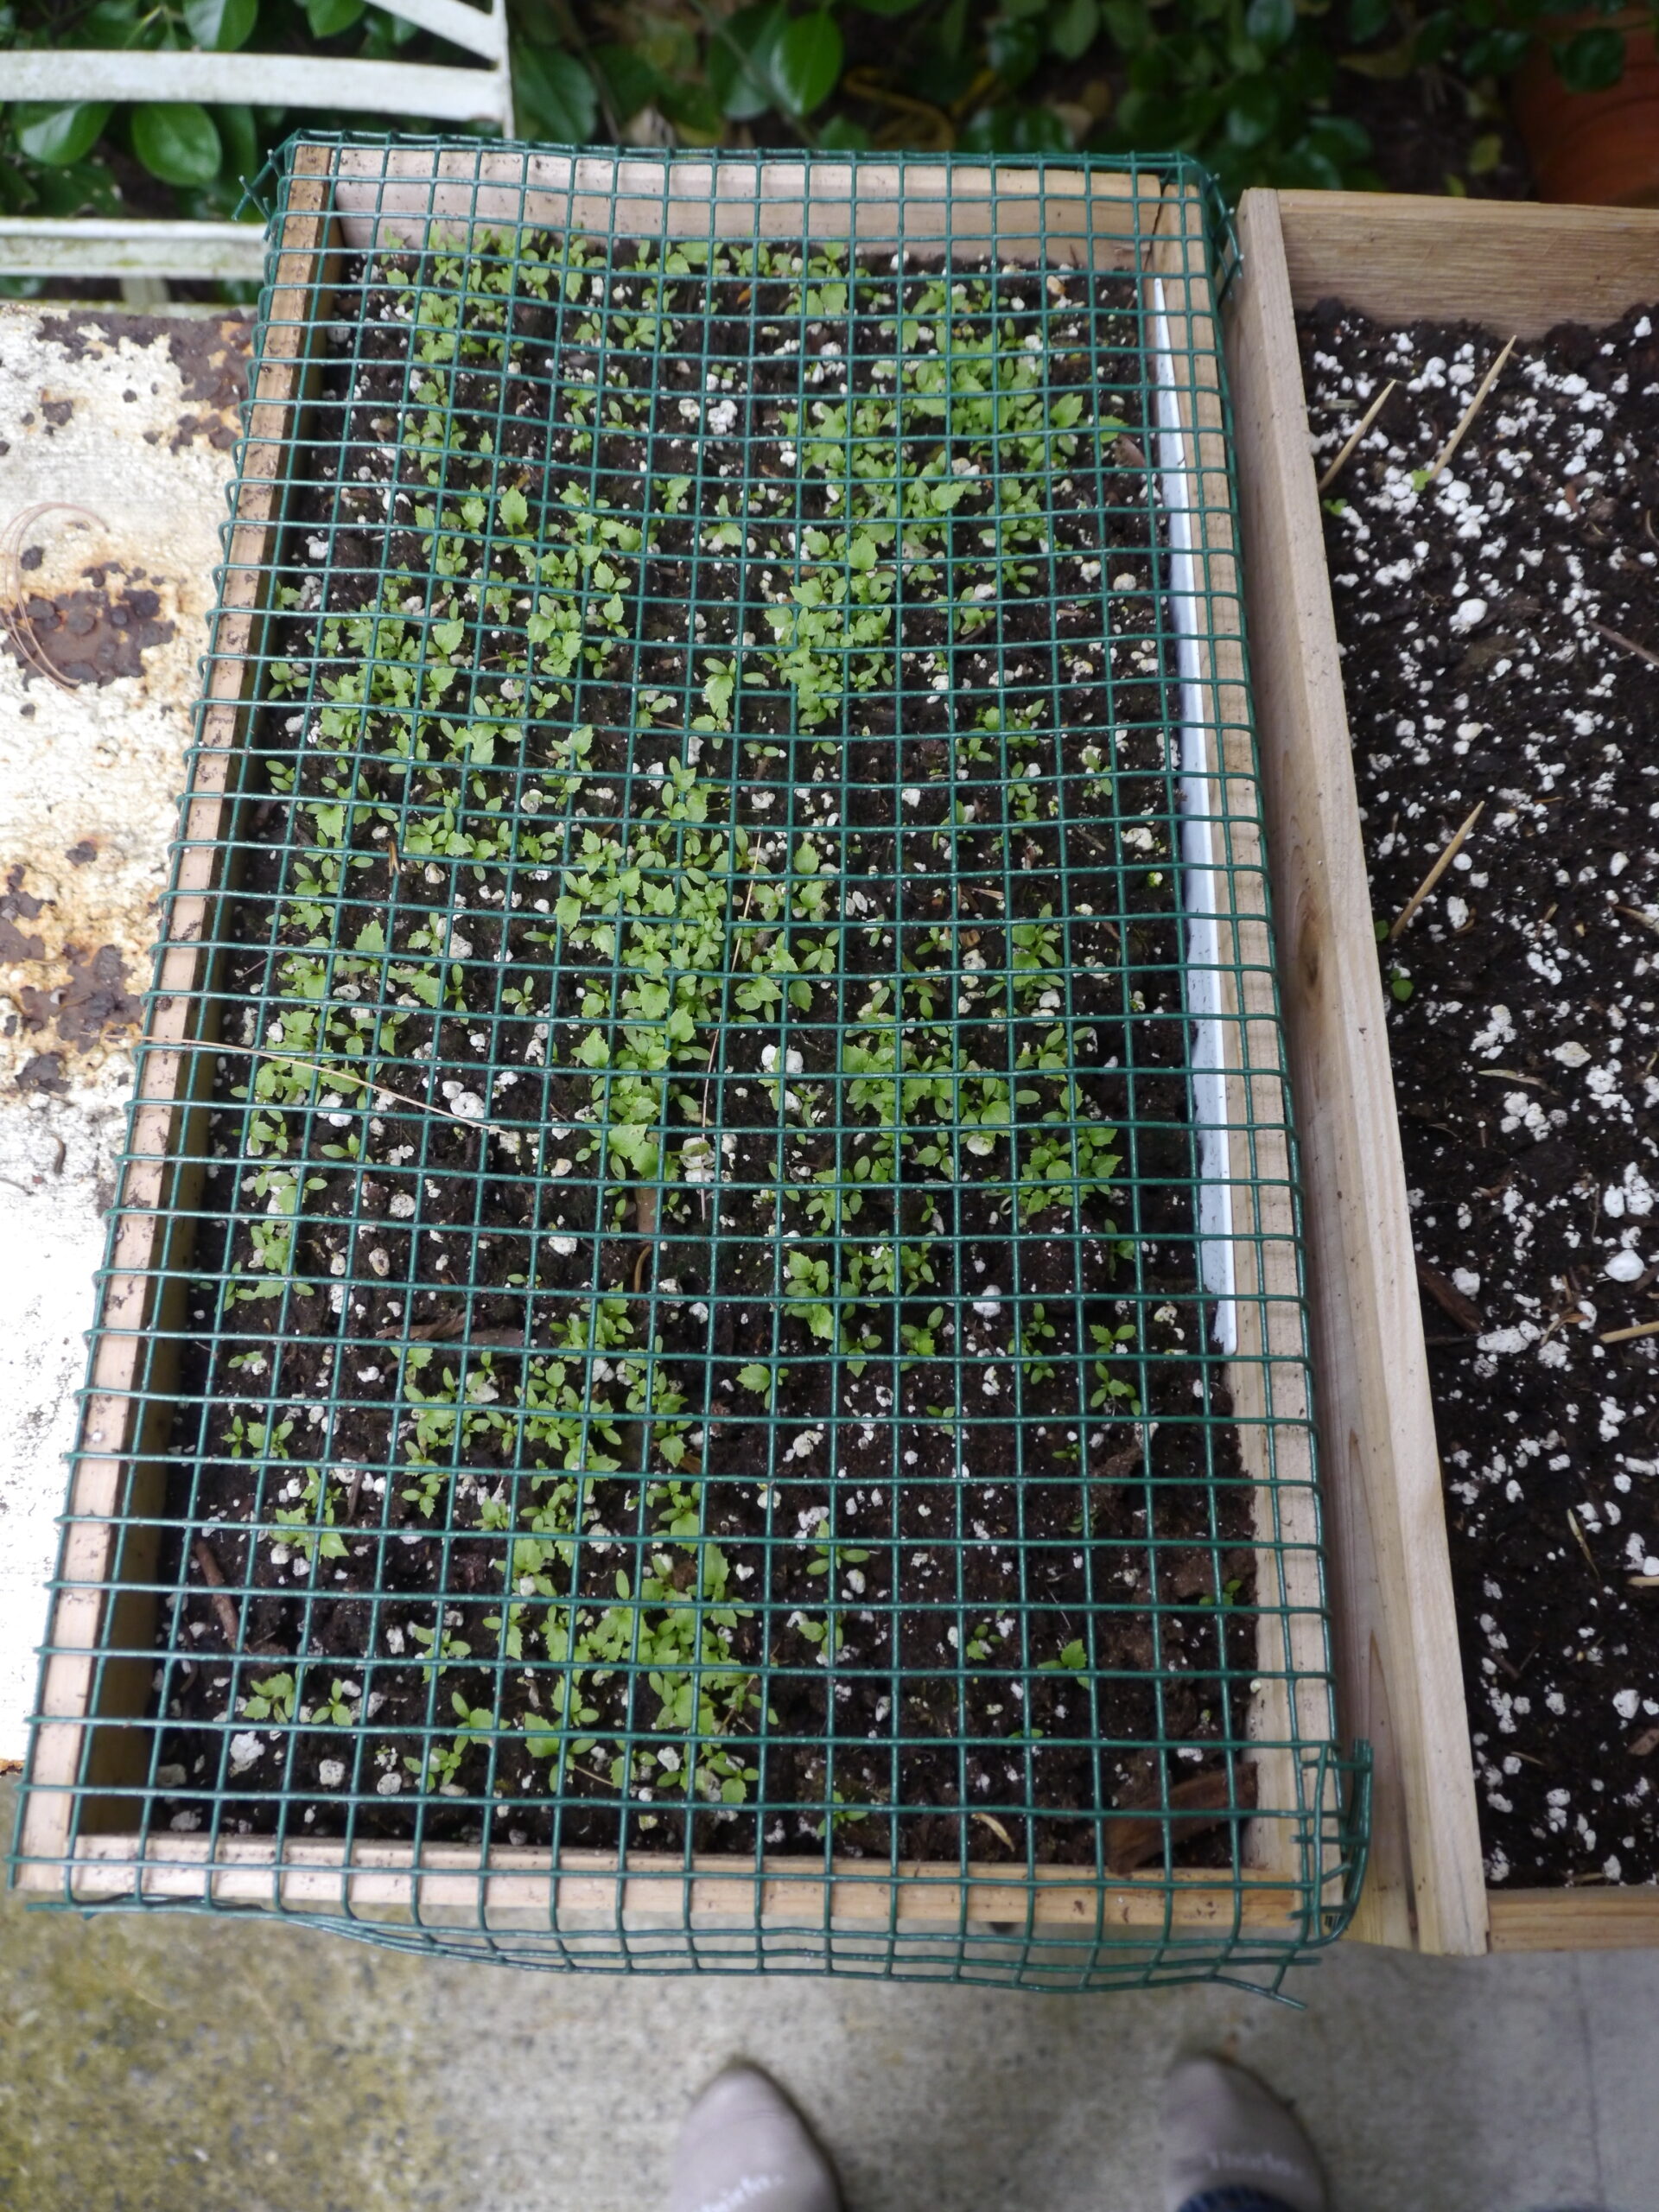 A wooden seed flat after a winter outside and when available, covered with snow. The wire mesh kept the mice out and the seedlings are now getting to a size where they can be pricked or teased out and transplanted into cells. These seedlings are of a Primula species, and the flat yielded hundreds of transplants that flowered the following year and years to come. The seeds cost about $15. The flat about $15. A $30 investment yielded about 200 plants that would have cost over $3,000 to purchase. Growing like this not only saves tons of money but also allows you to grow varieties that will make your garden truly unique.  ANDREW MESSINGER